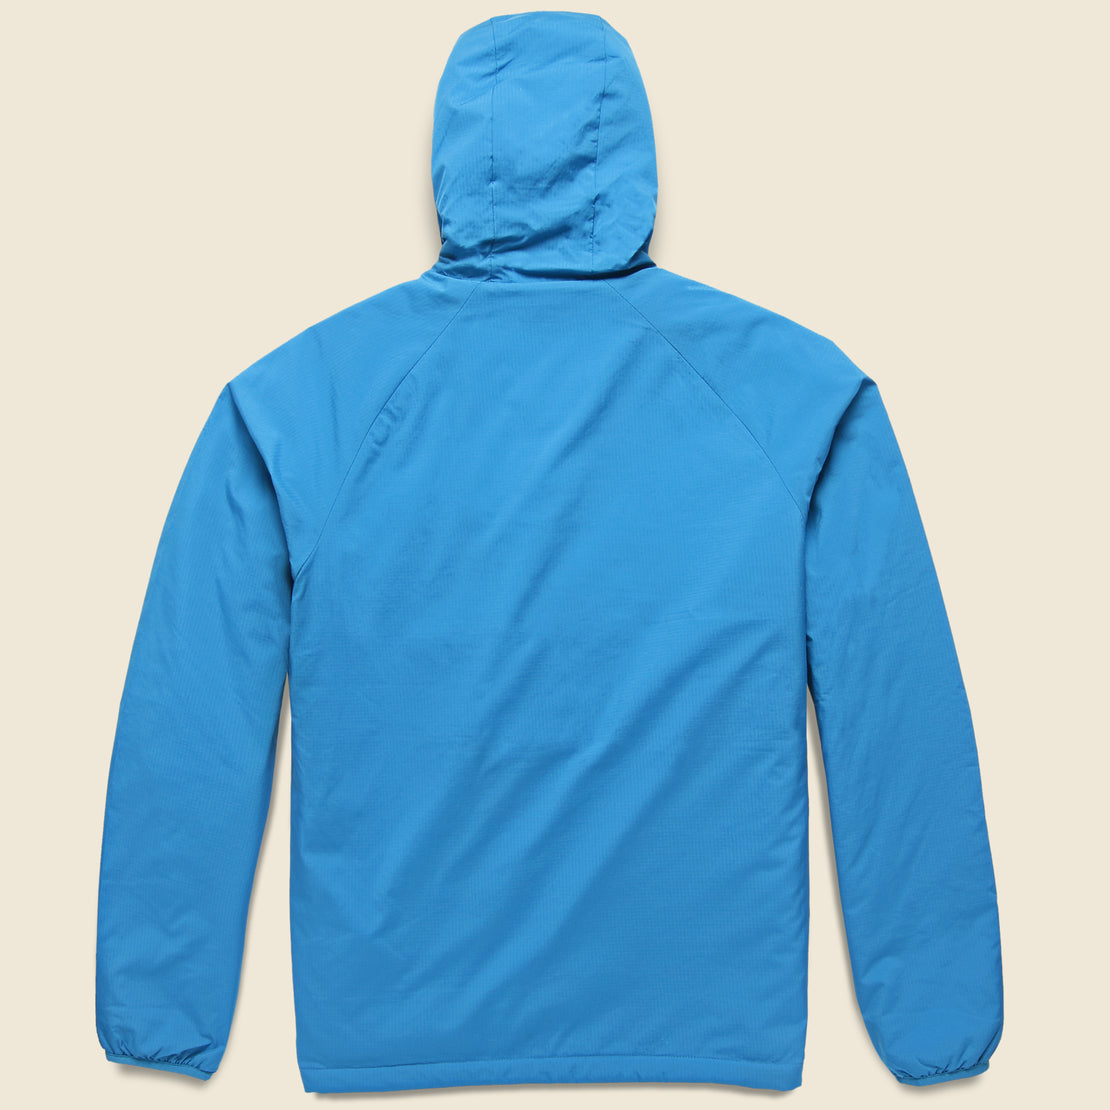 Puffer Zip Jacket - Blue - Topo Designs - STAG Provisions - Outerwear - Coat / Jacket